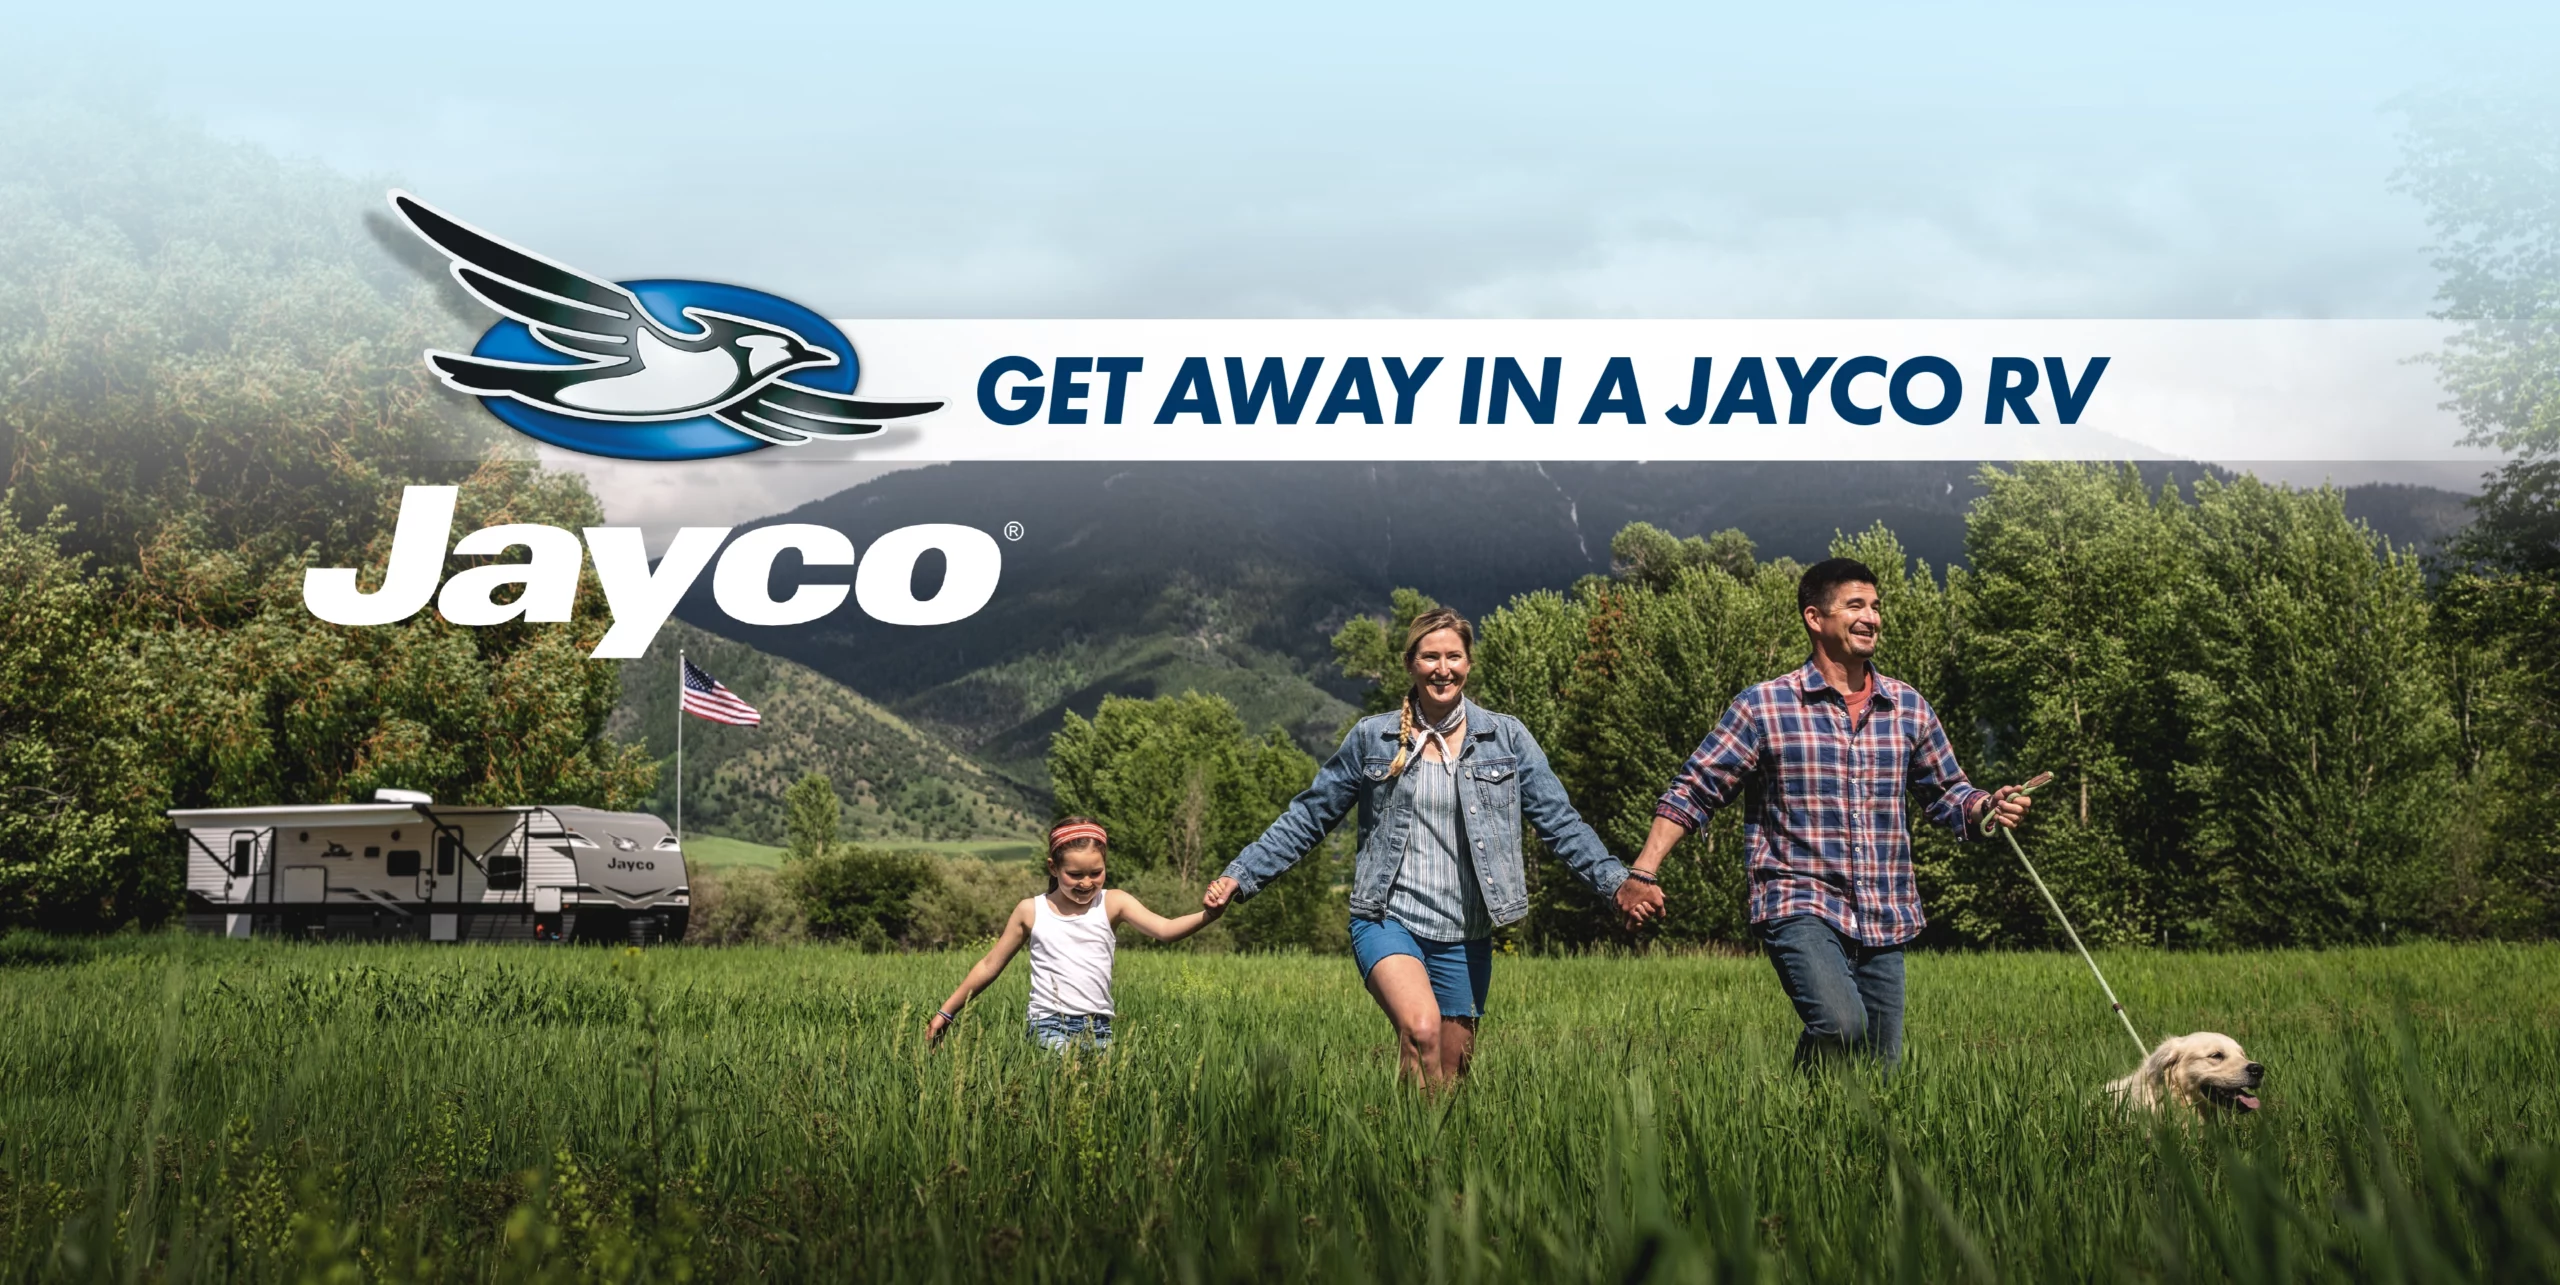 Get Away in a Jayco RV